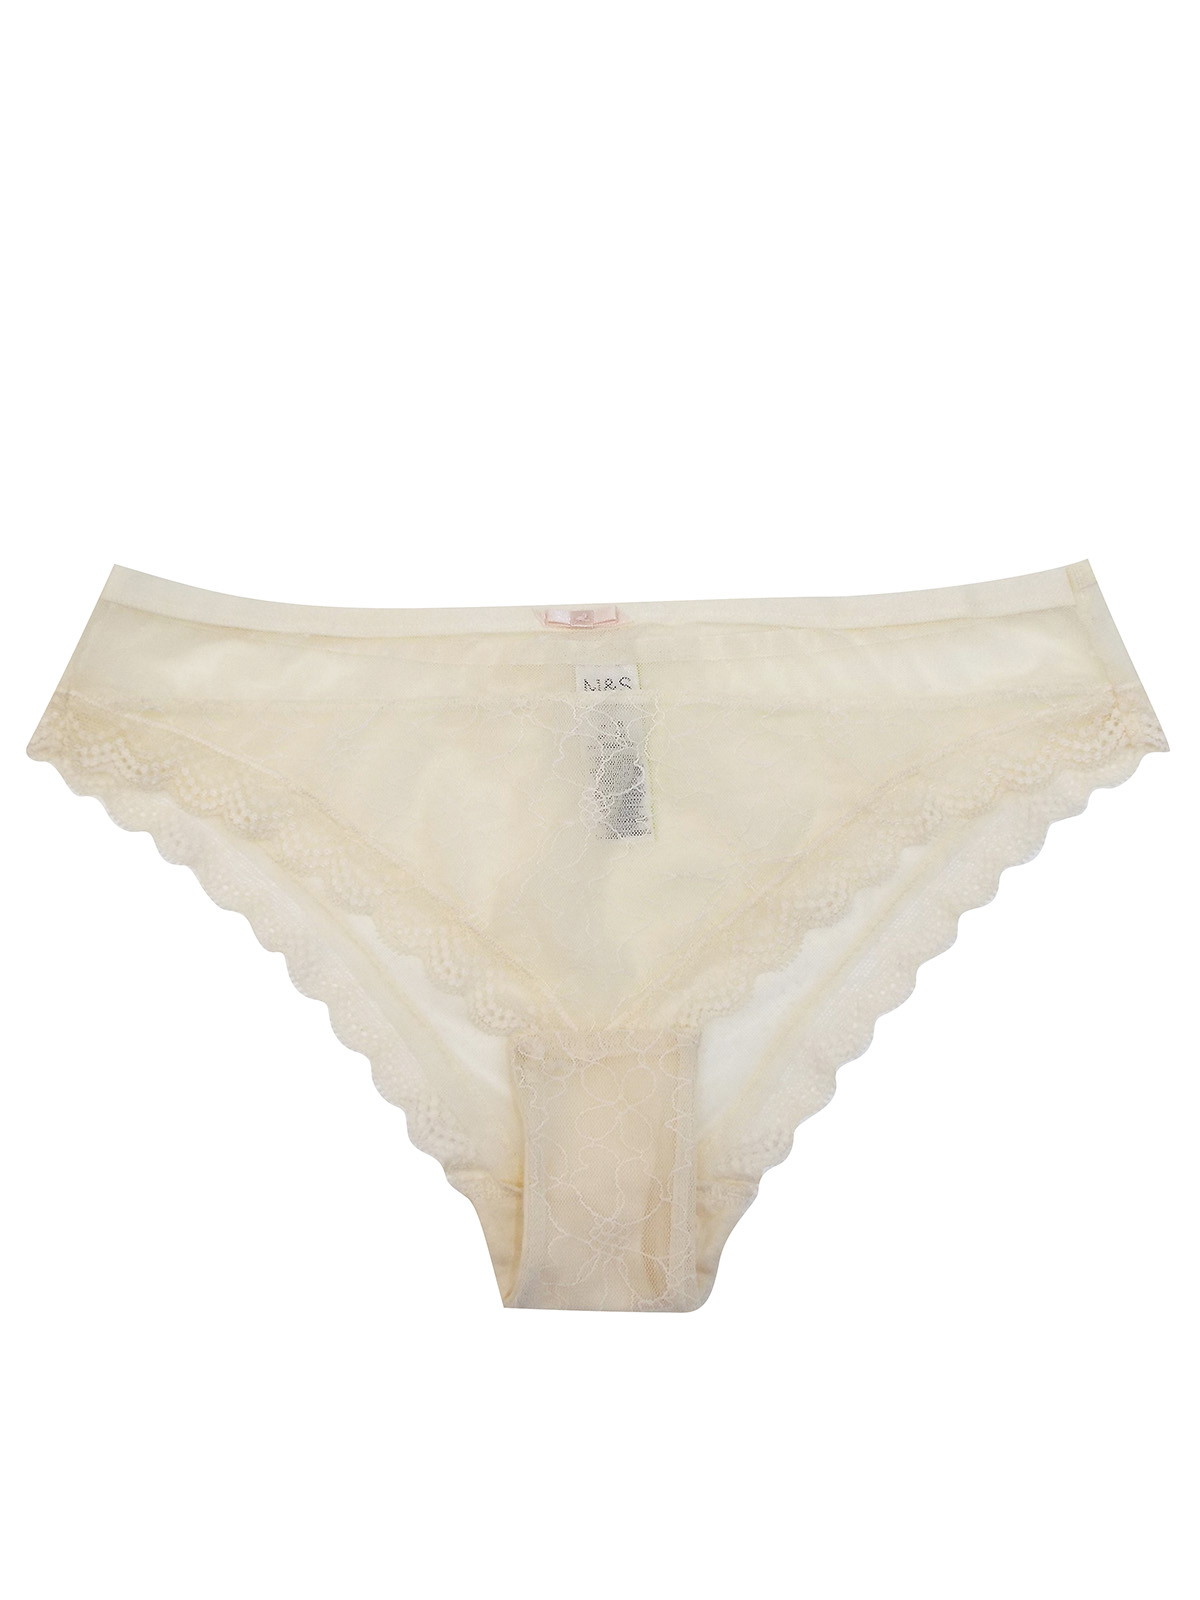 Marks and Spencer - - M&5 CREAM Lace Trim Brazilian Knickers - Size 10 ...